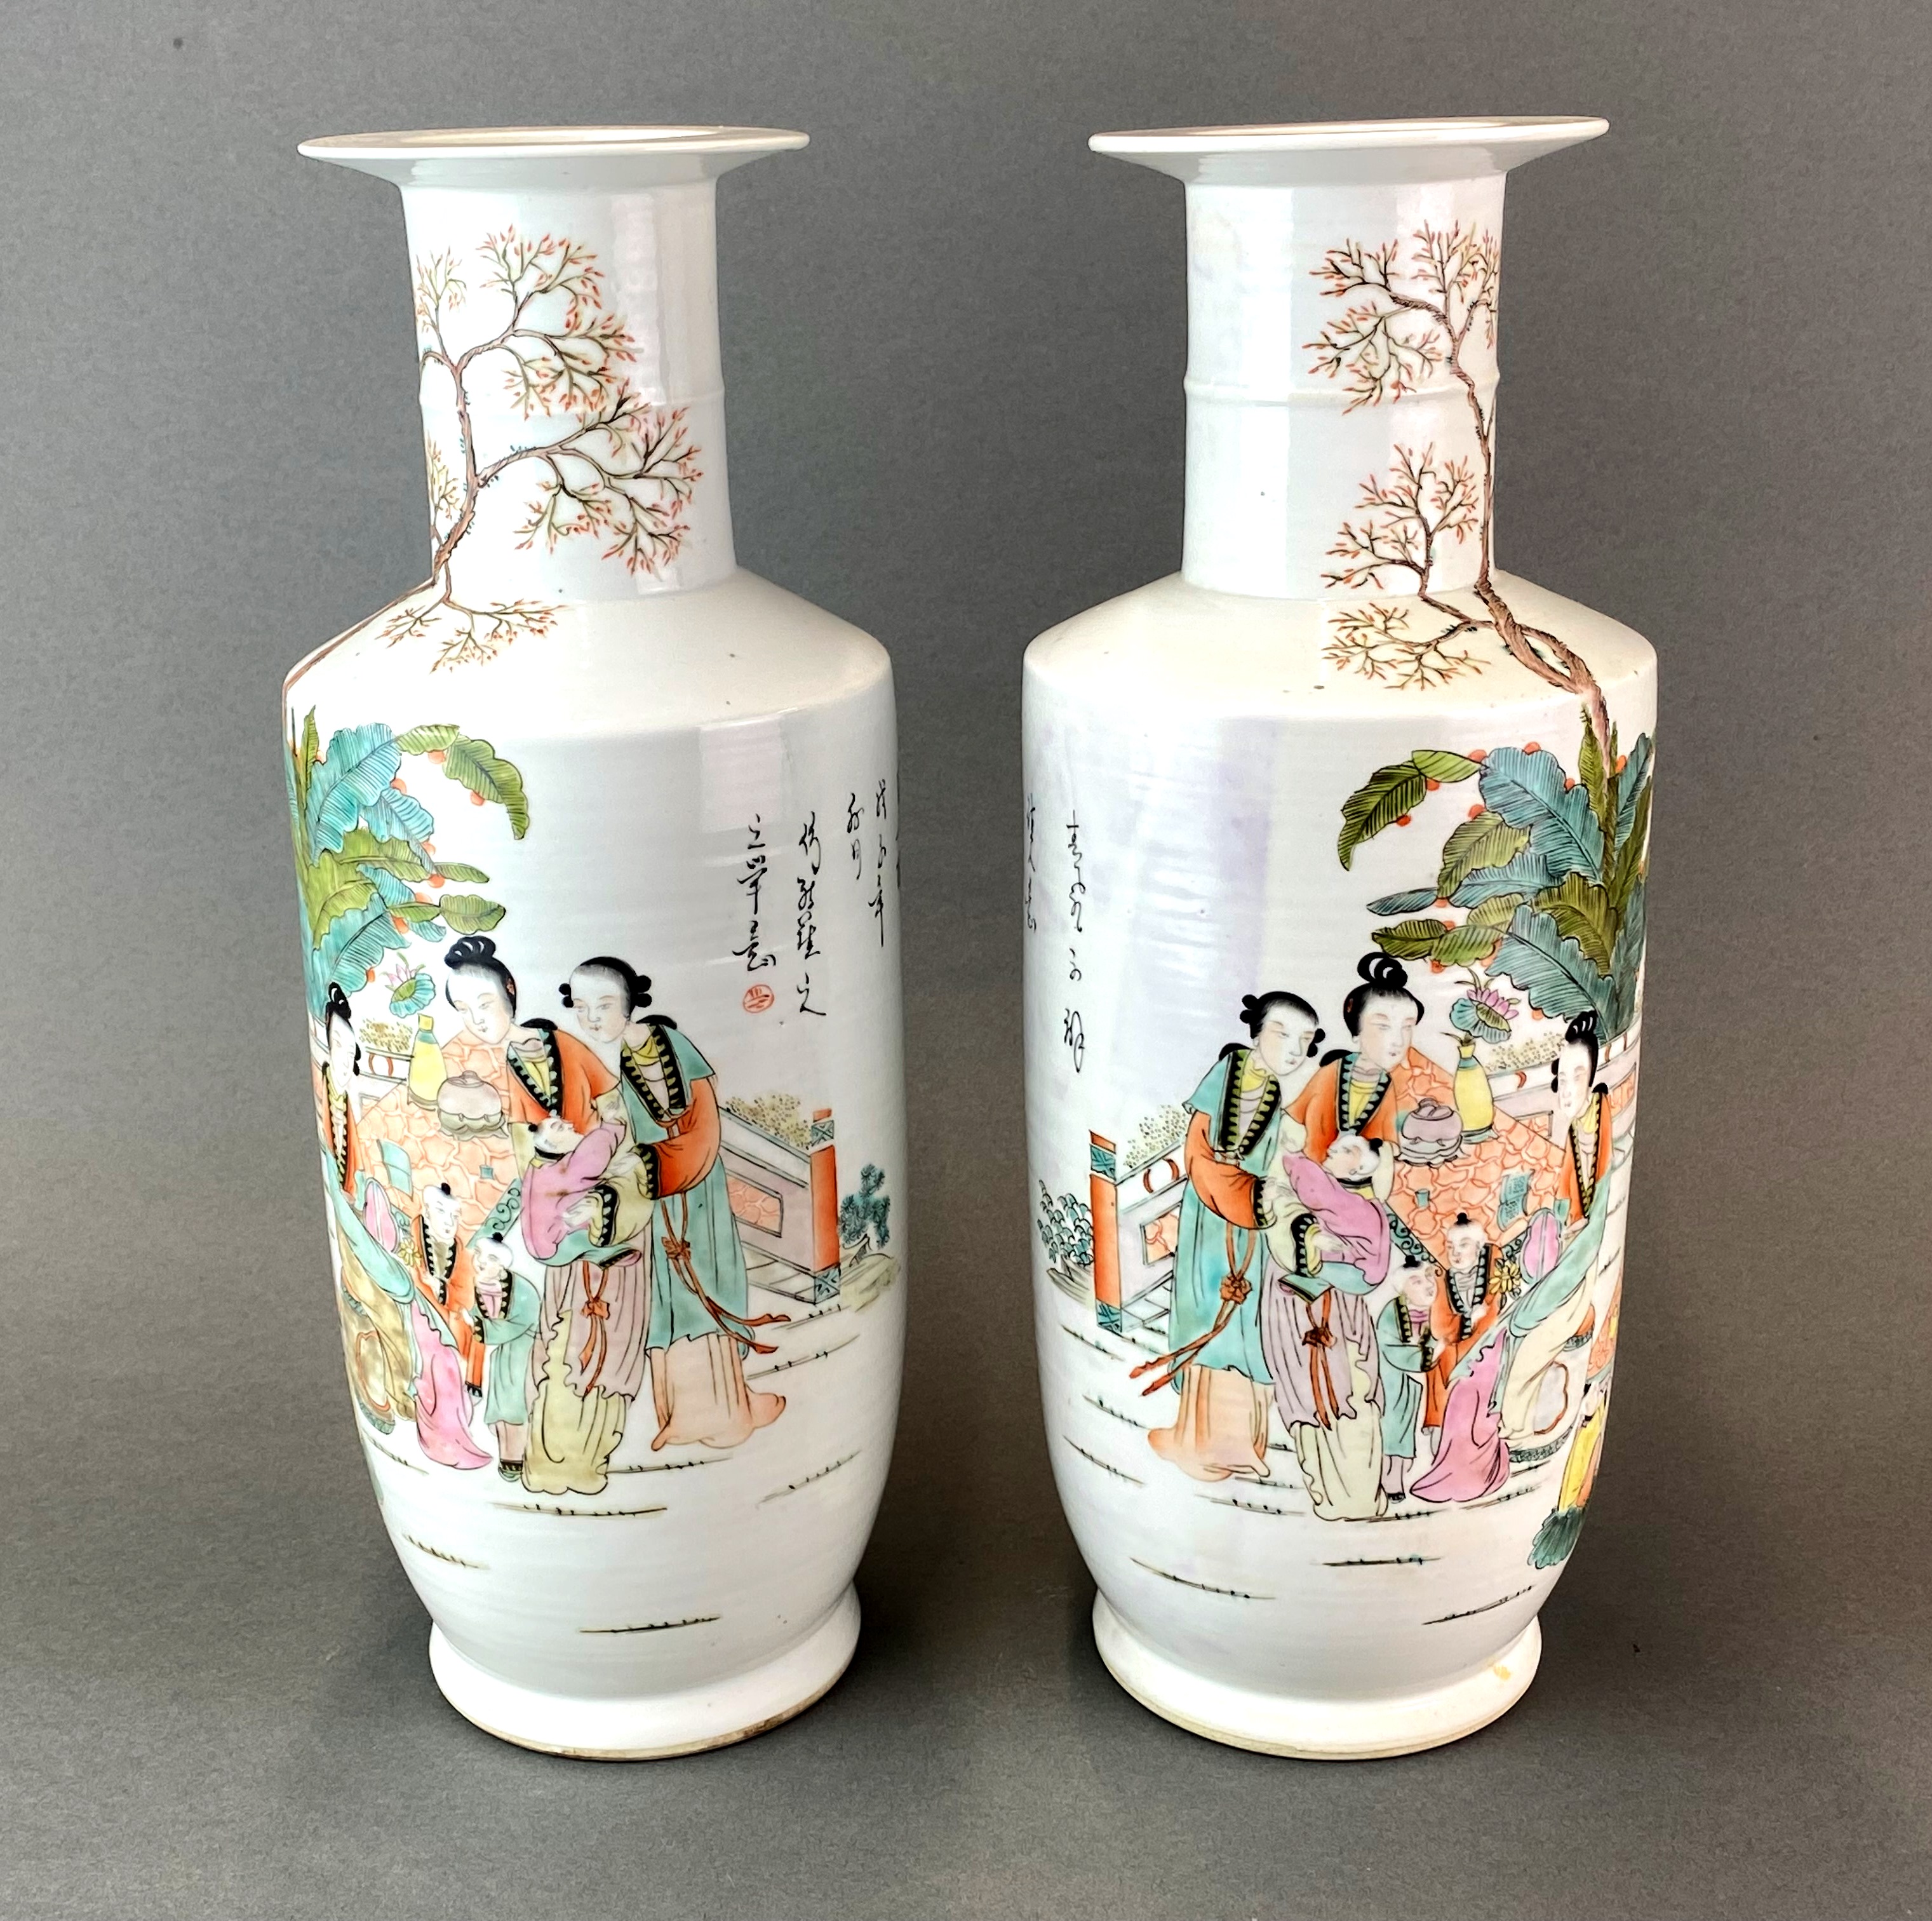 A pair of Chinese hand enamelled porcelain vases, H. 41cm.